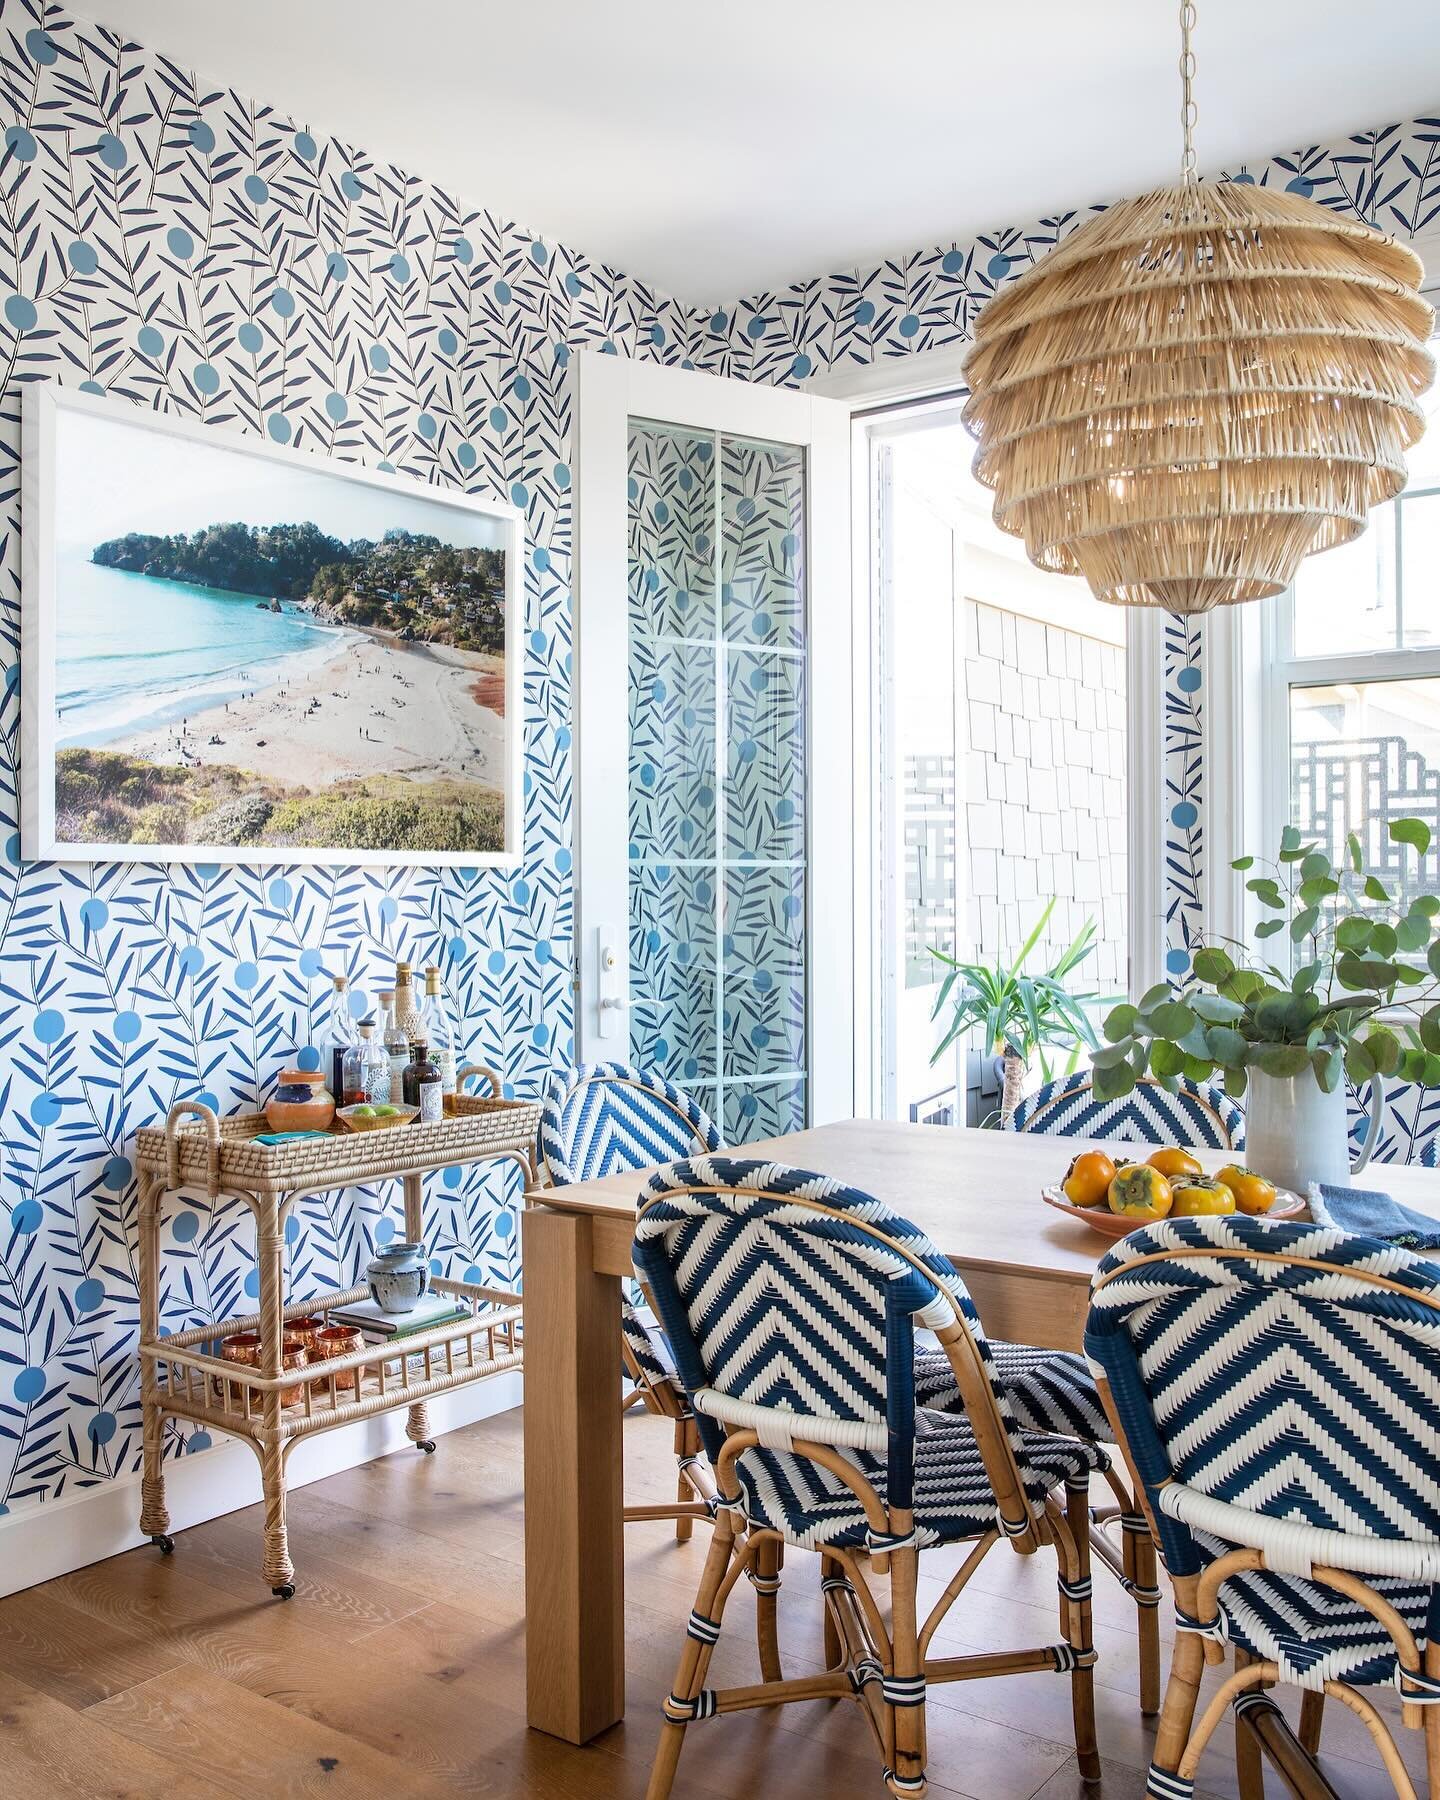 Chasing away the rain with this cheerful dining room. Wild to think that we photographed this project 4 years ago and now are working with the same lovely clients on the design of their new home 💙

Photo @vivianjohnsonphoto